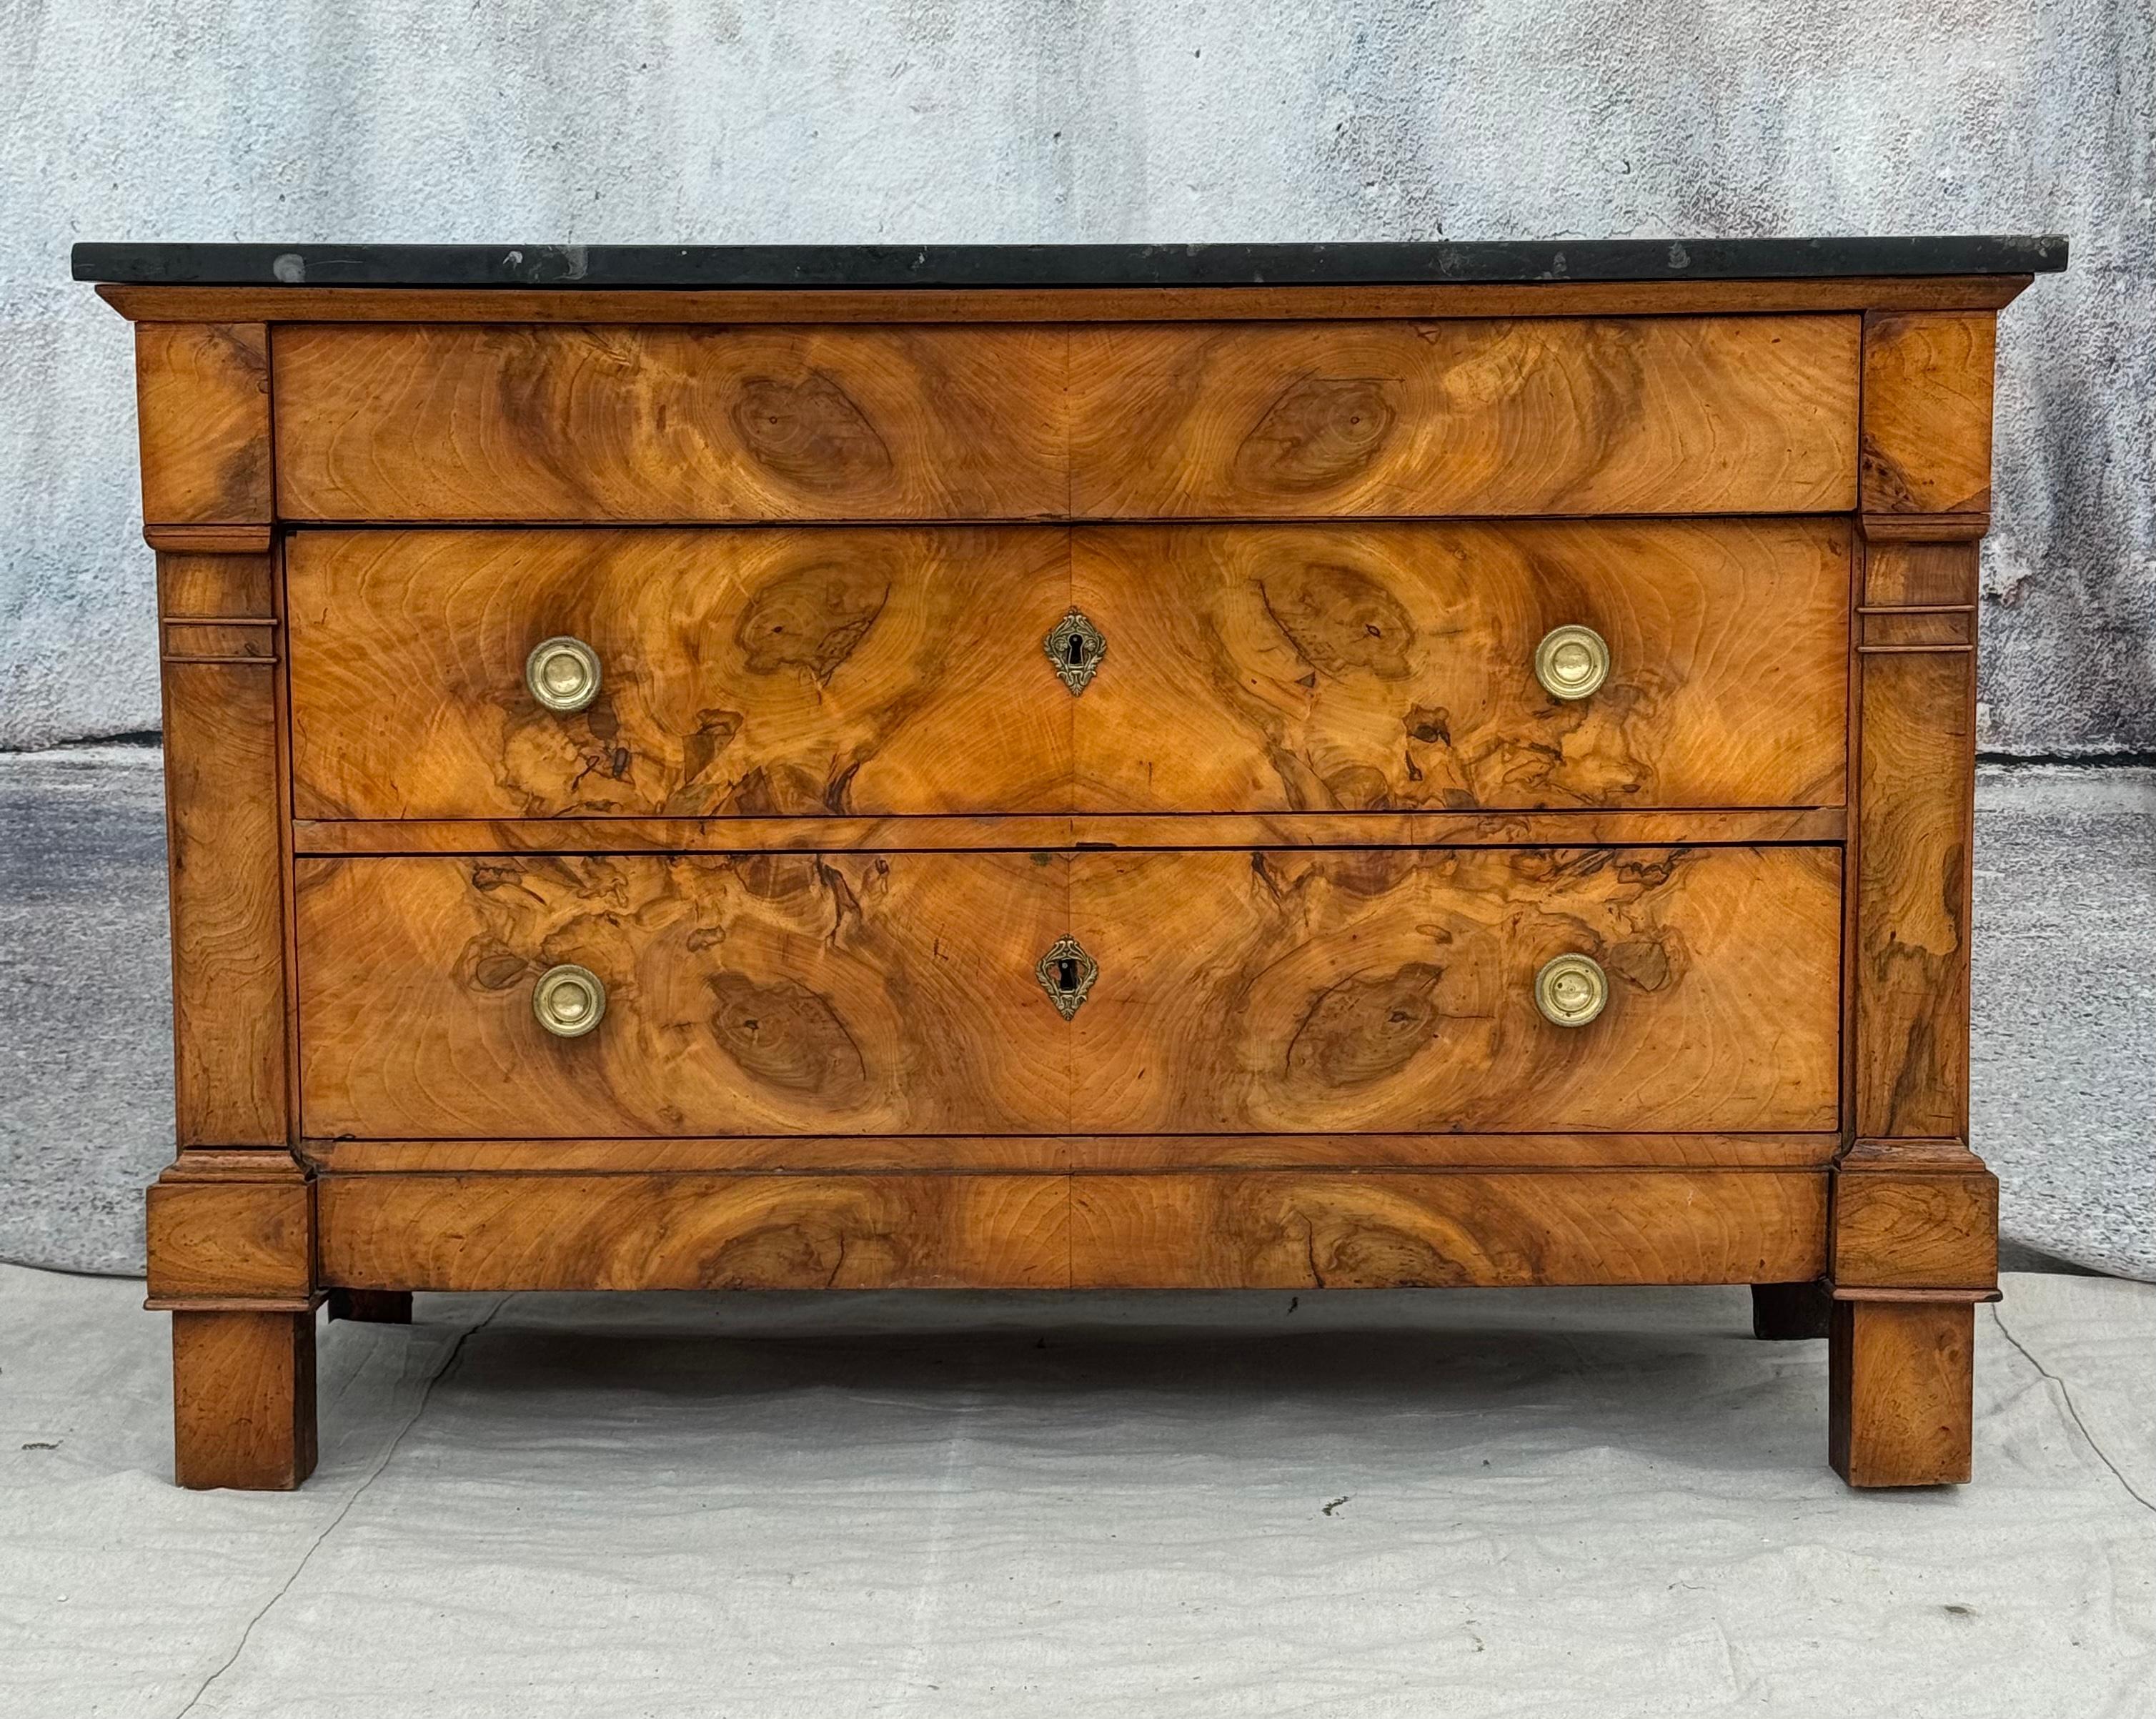 Elegant French empire style walnut chest with black granite marble top. Chest features a wonderfully figured burl walnut with three storage drawers with original brass hardware. Versatile chest can be used in modern spaces, as well as in classical